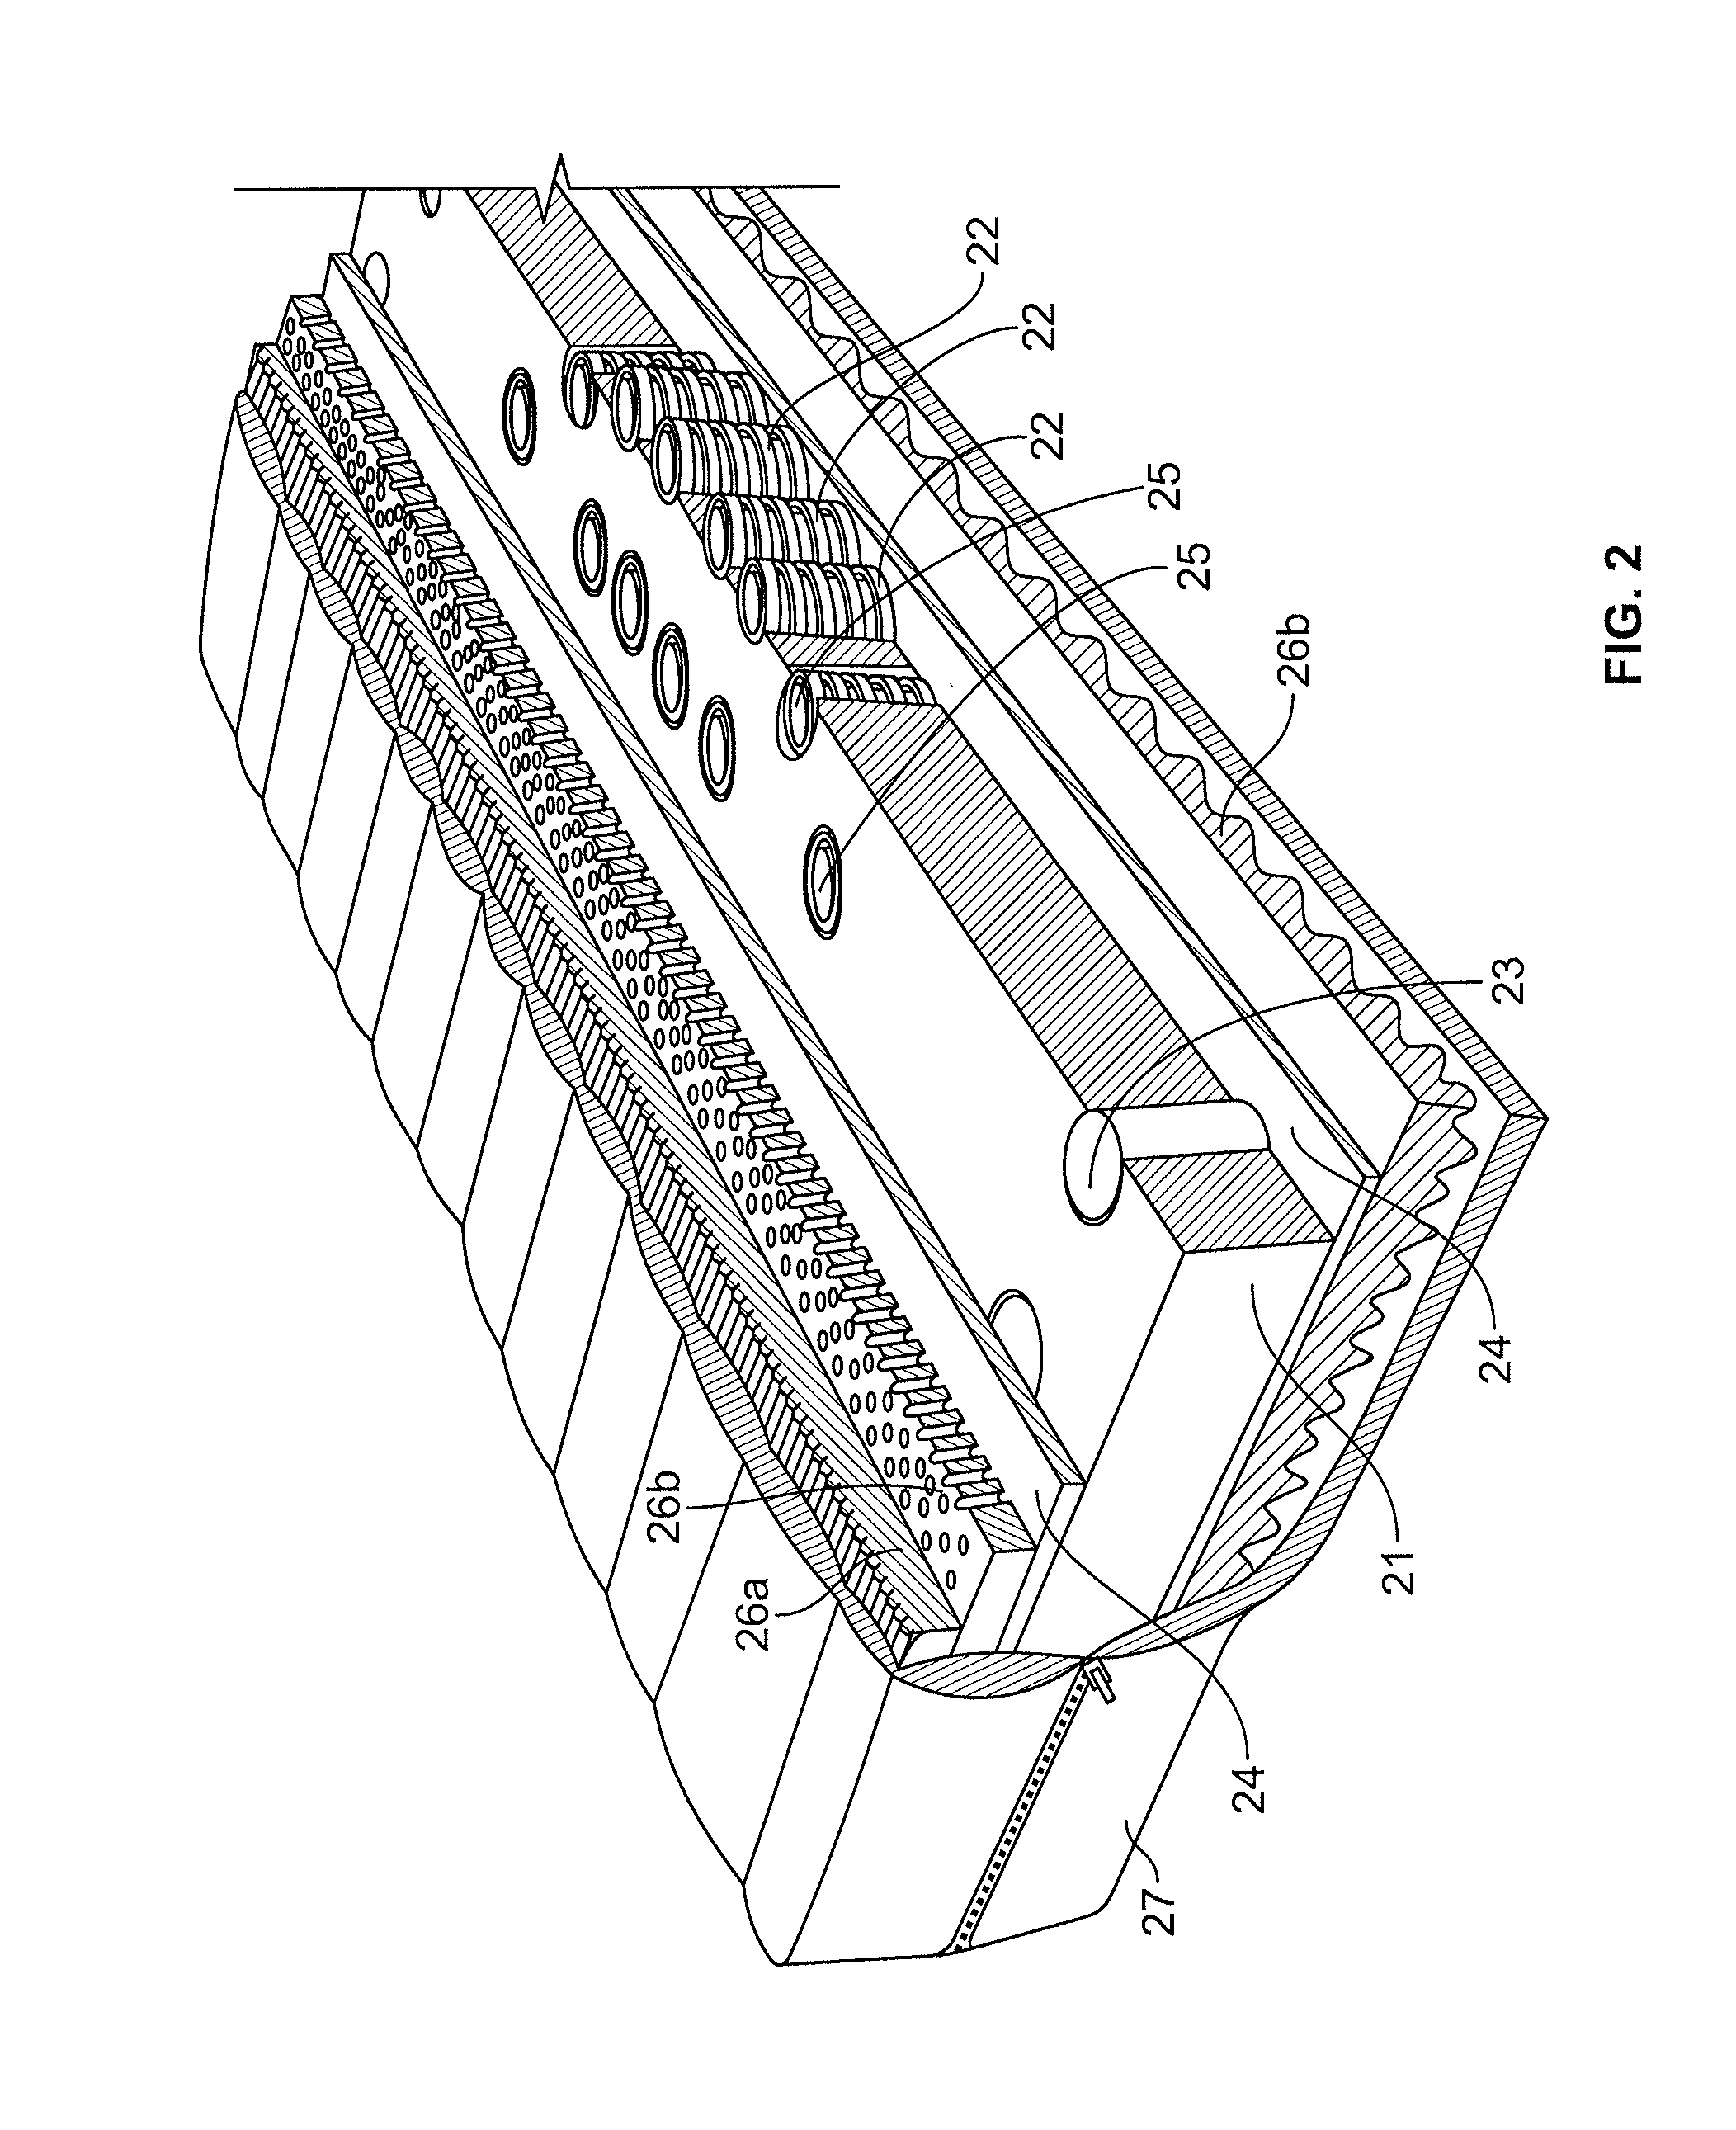 Wooden spring and mattress manufactured with wooden springs